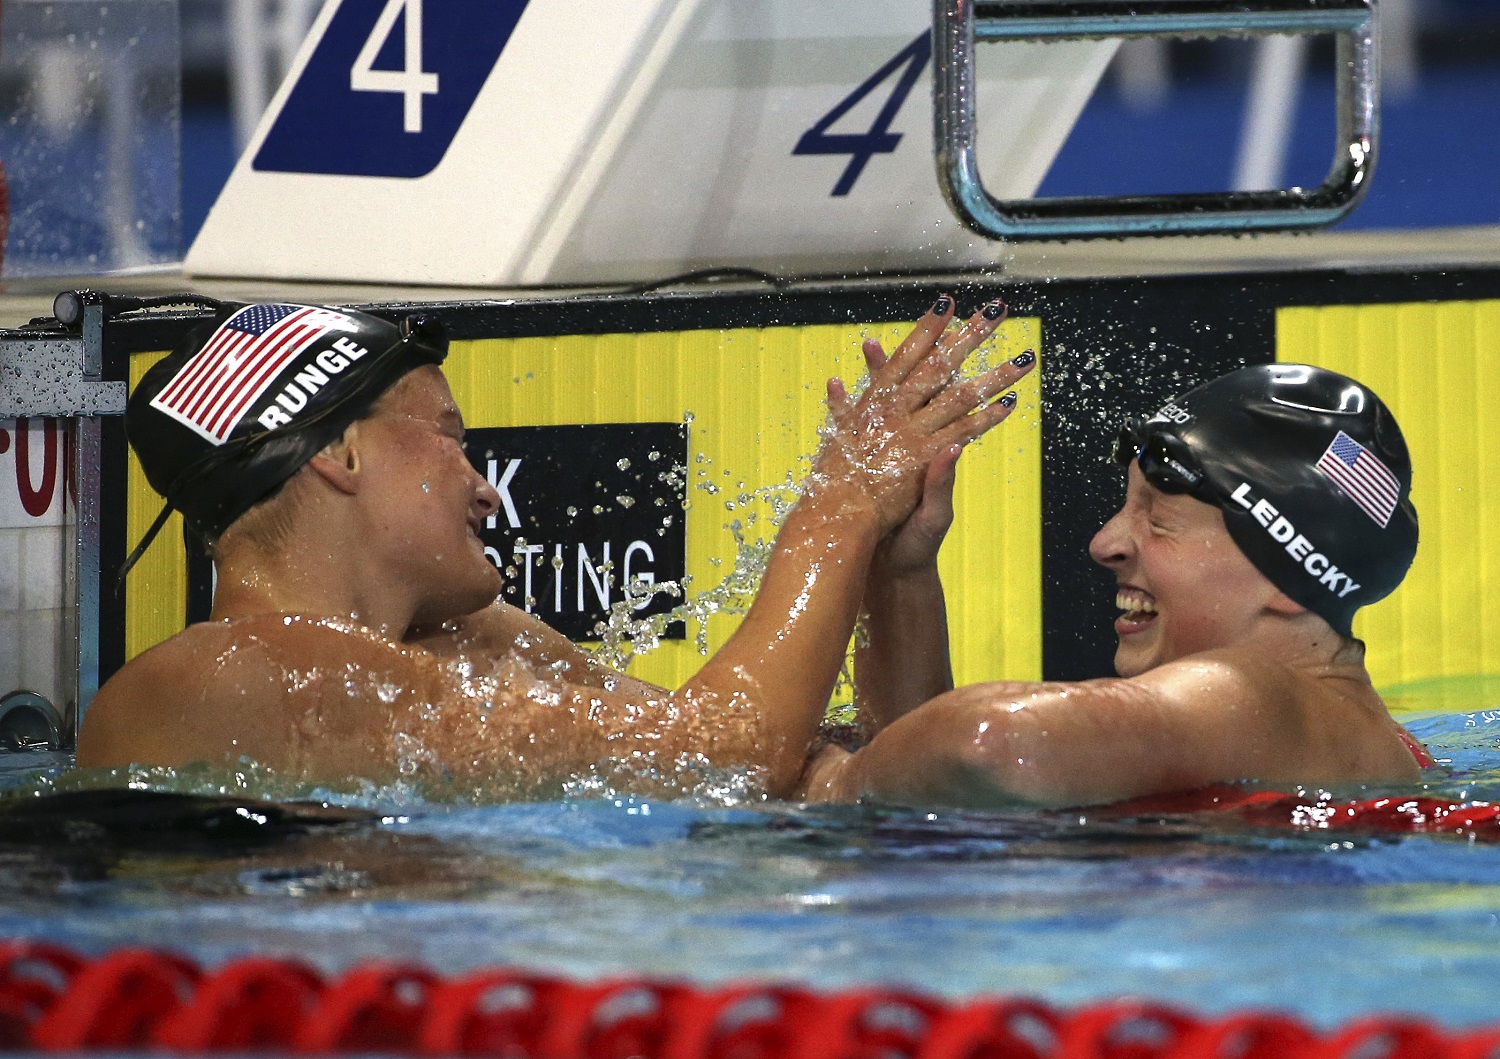 Katie Ledecky of the U.S. high fives team mate Cierra Runge after Ledecky set a new world record in her women's 400m freestyle final at the Pan Pacific swimming championships in Gold Coast, Australia, Saturday, Aug. 23, 2014. Ledecky set a new world record of 3:58.37 ahead of Runge and Lauren Boyle of New Zealand.(AP Photo/Rick Rycroft)